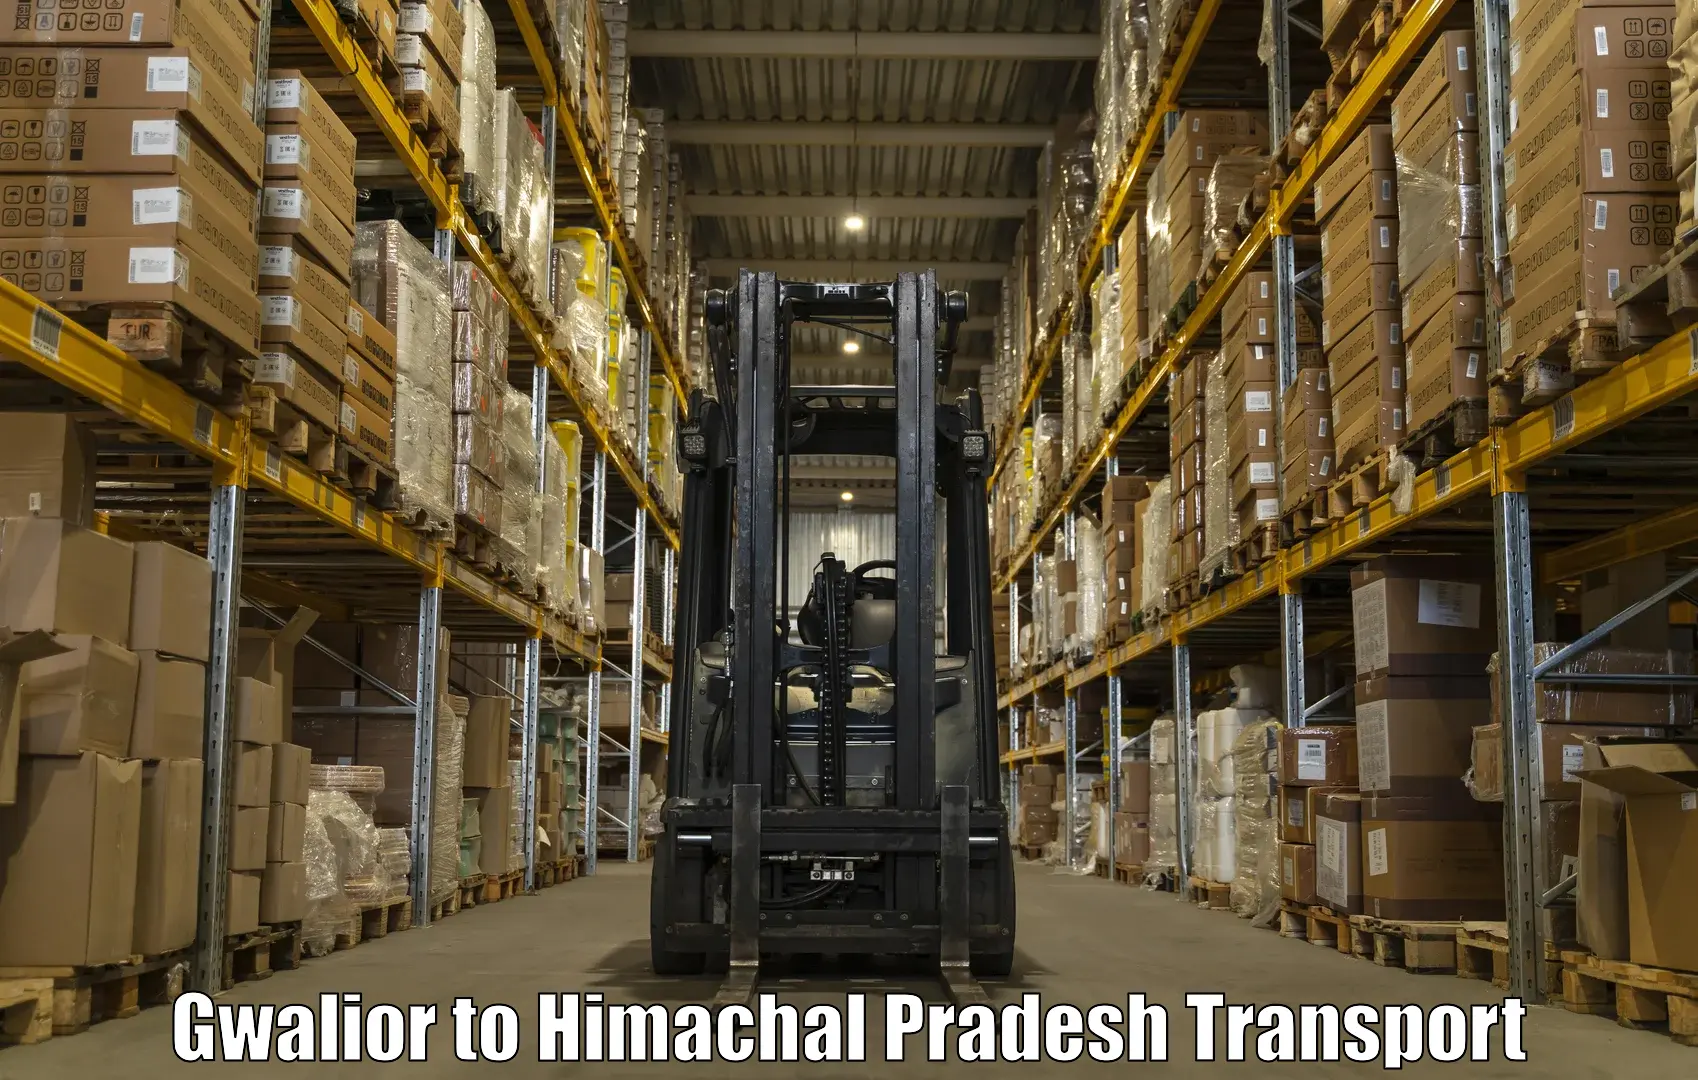 Truck transport companies in India Gwalior to Waknaghat